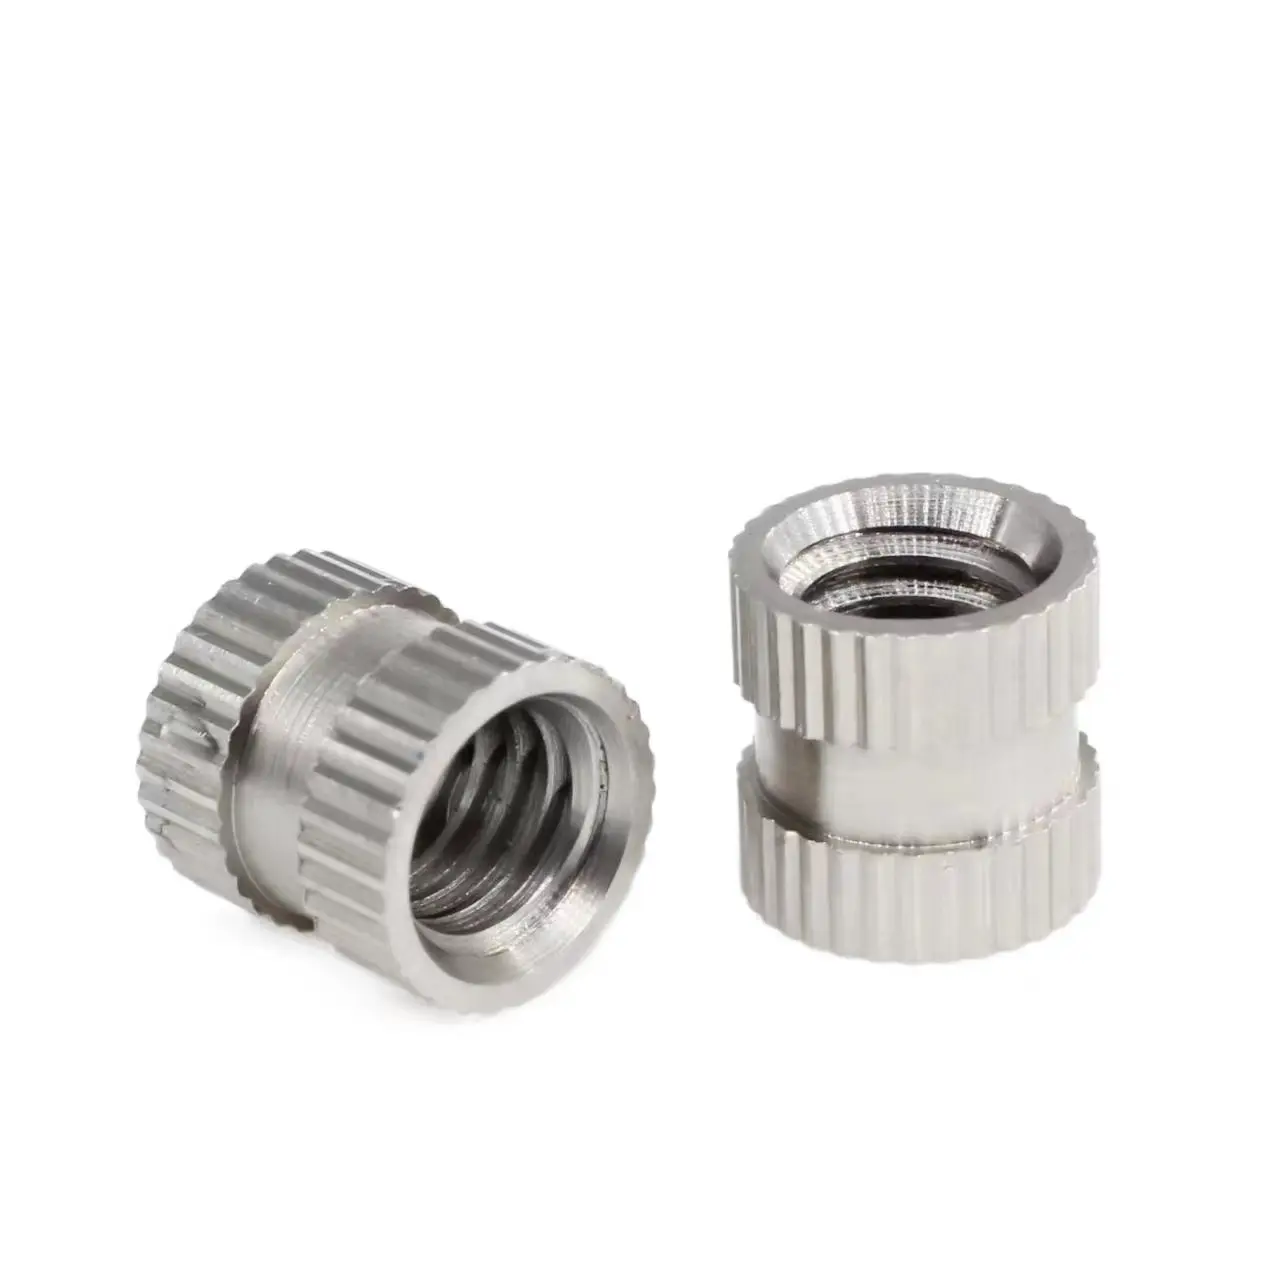 Custom M2 GB/T 809 Plain Stainless Steel A Grade cylindrical Vertical Knurled Injection Molded Insert Nut For Plastic Housing